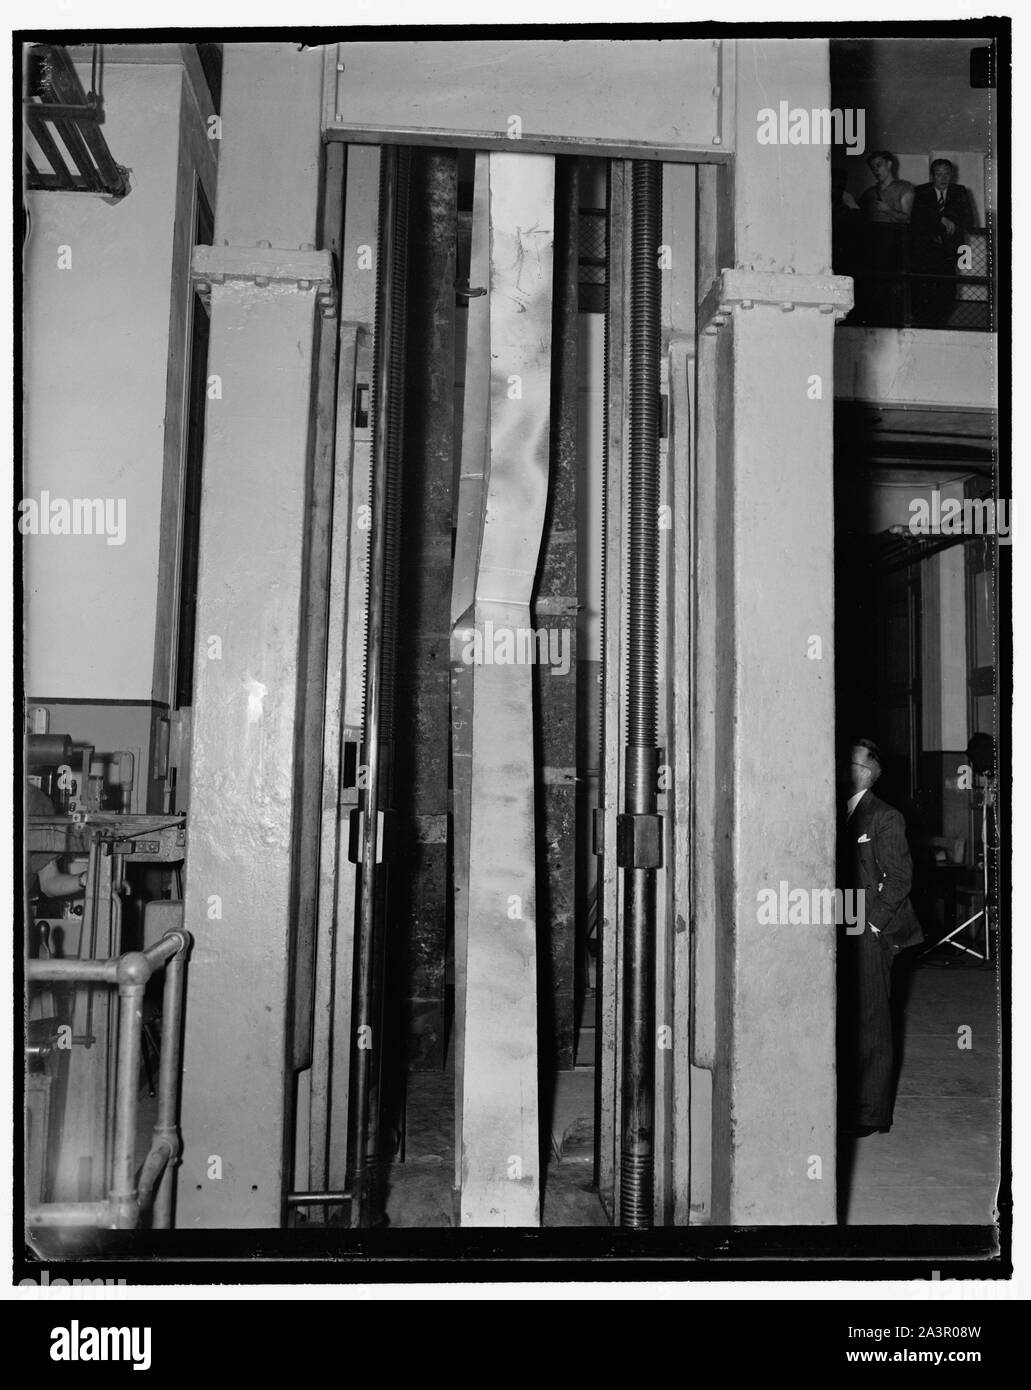 Steel bending. Washington, D.C., Sept. 23. English: Steel bending. Washington, D.C., Sept. 23. Photo shows the welded steel knees in the 600,000 lb. testing machine at the U.S. Bureau of Standards today, as it buckled under 153,600 lb. maximum load. This rigid steel frame knee was designed to withstand 60,000 lbs. 9/23/37 Stock Photo